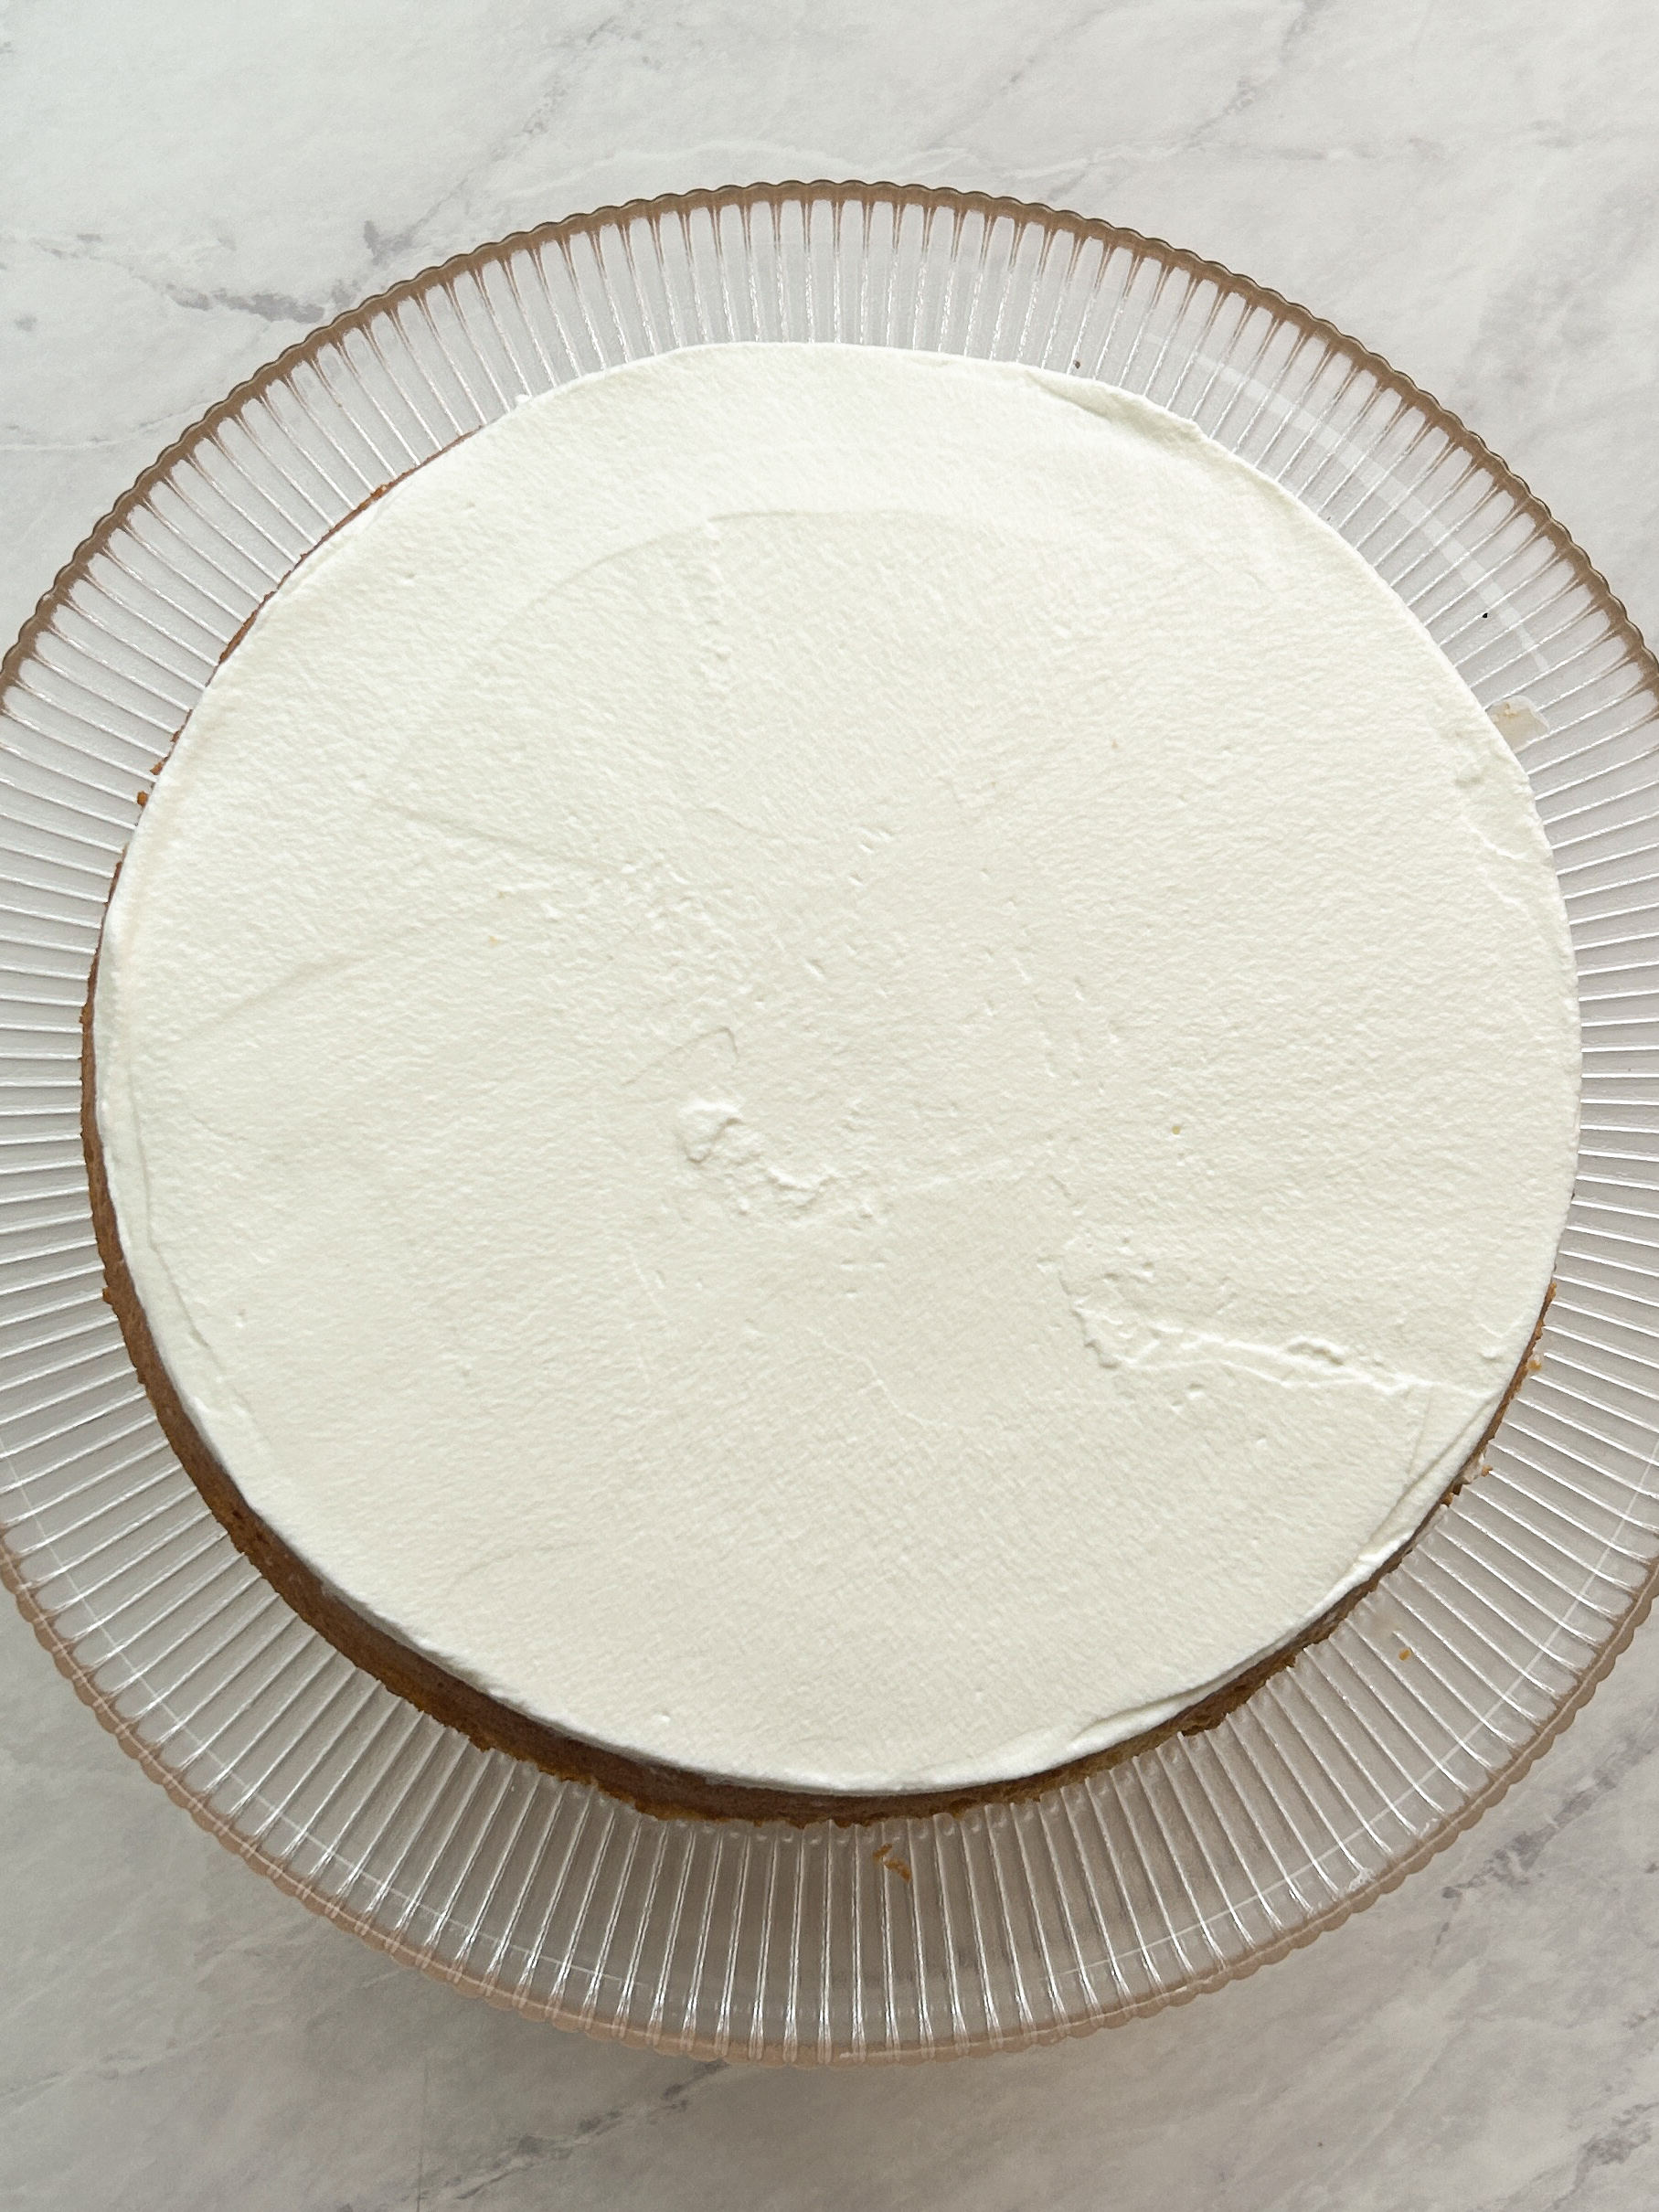 whipped cream spread on top of a tres leches cake